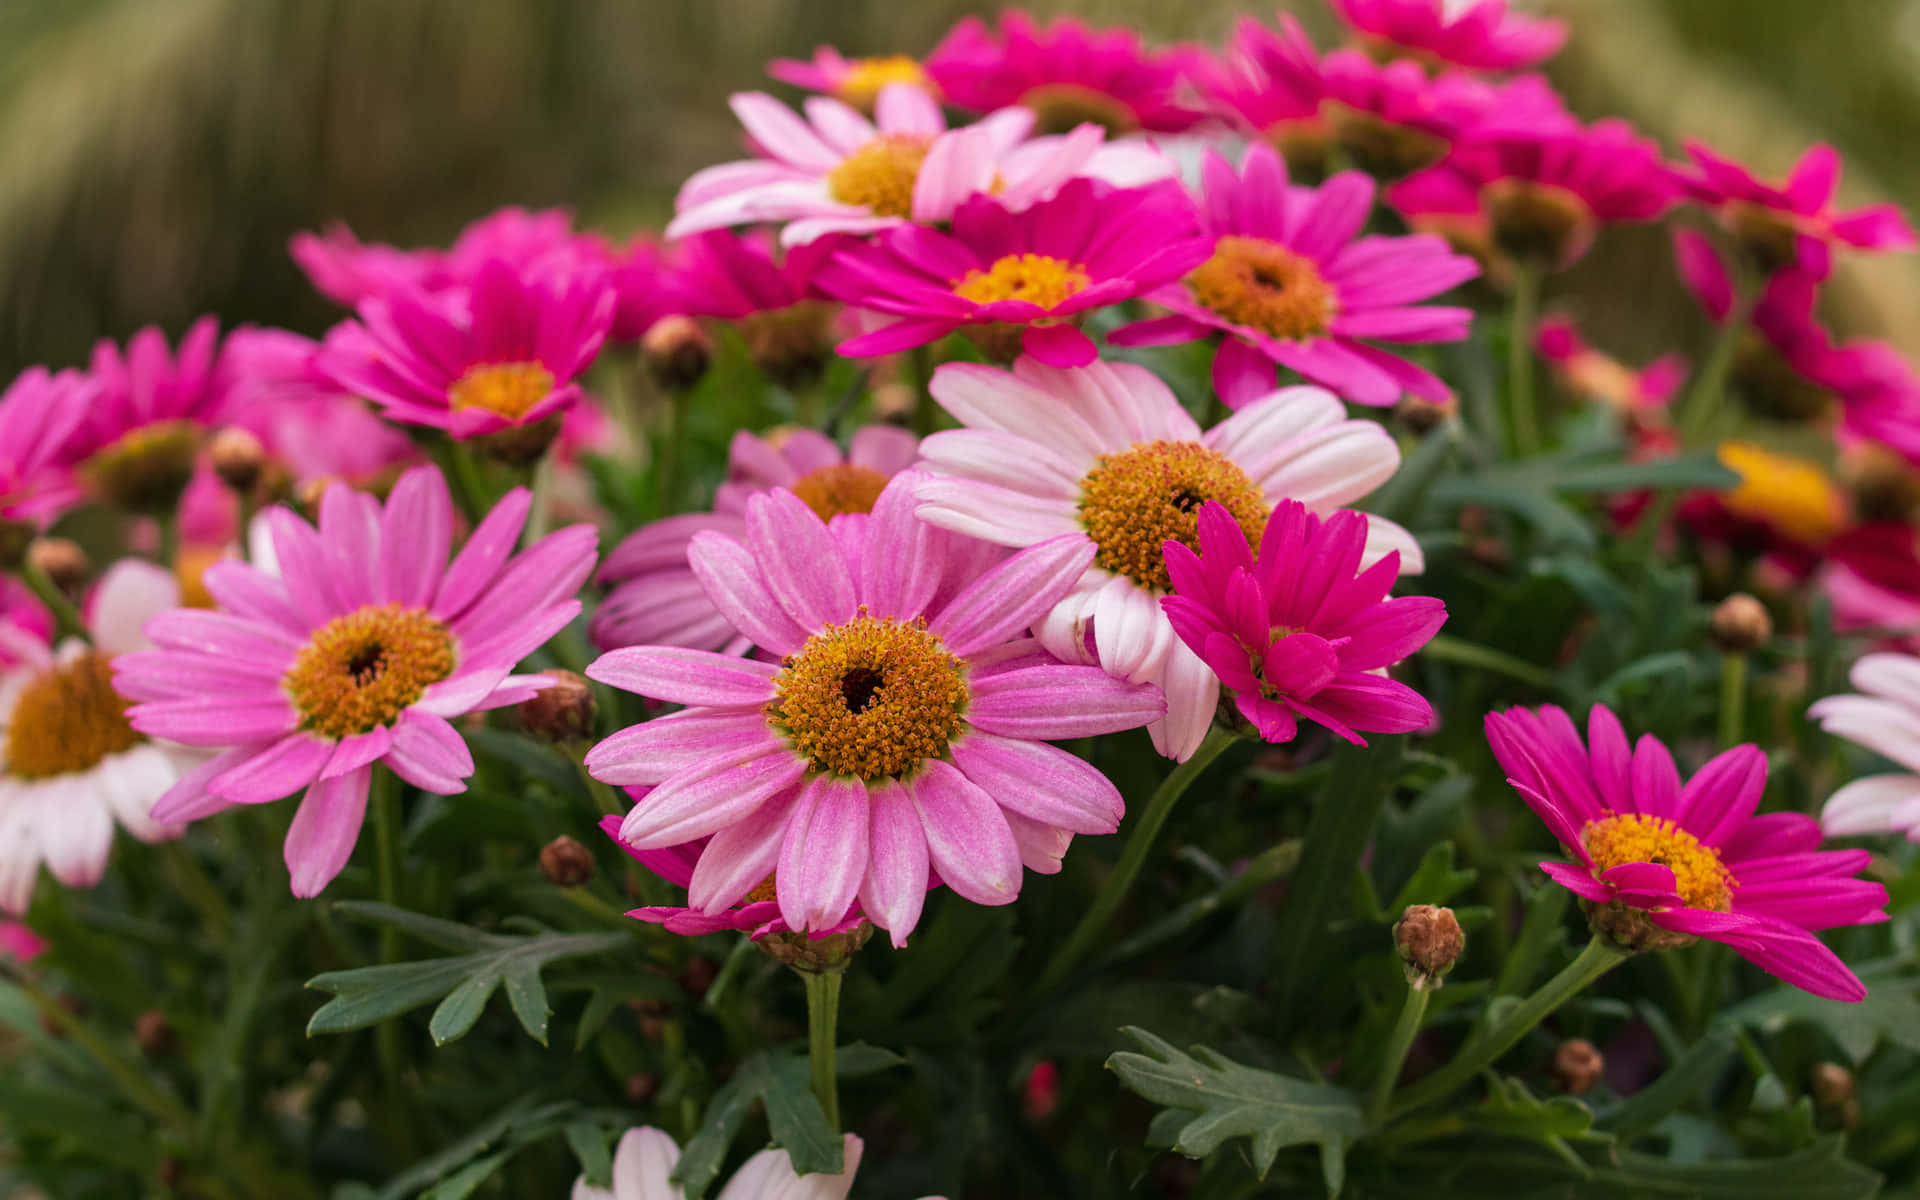 Pink And White Daisies In A Pot Wallpaper